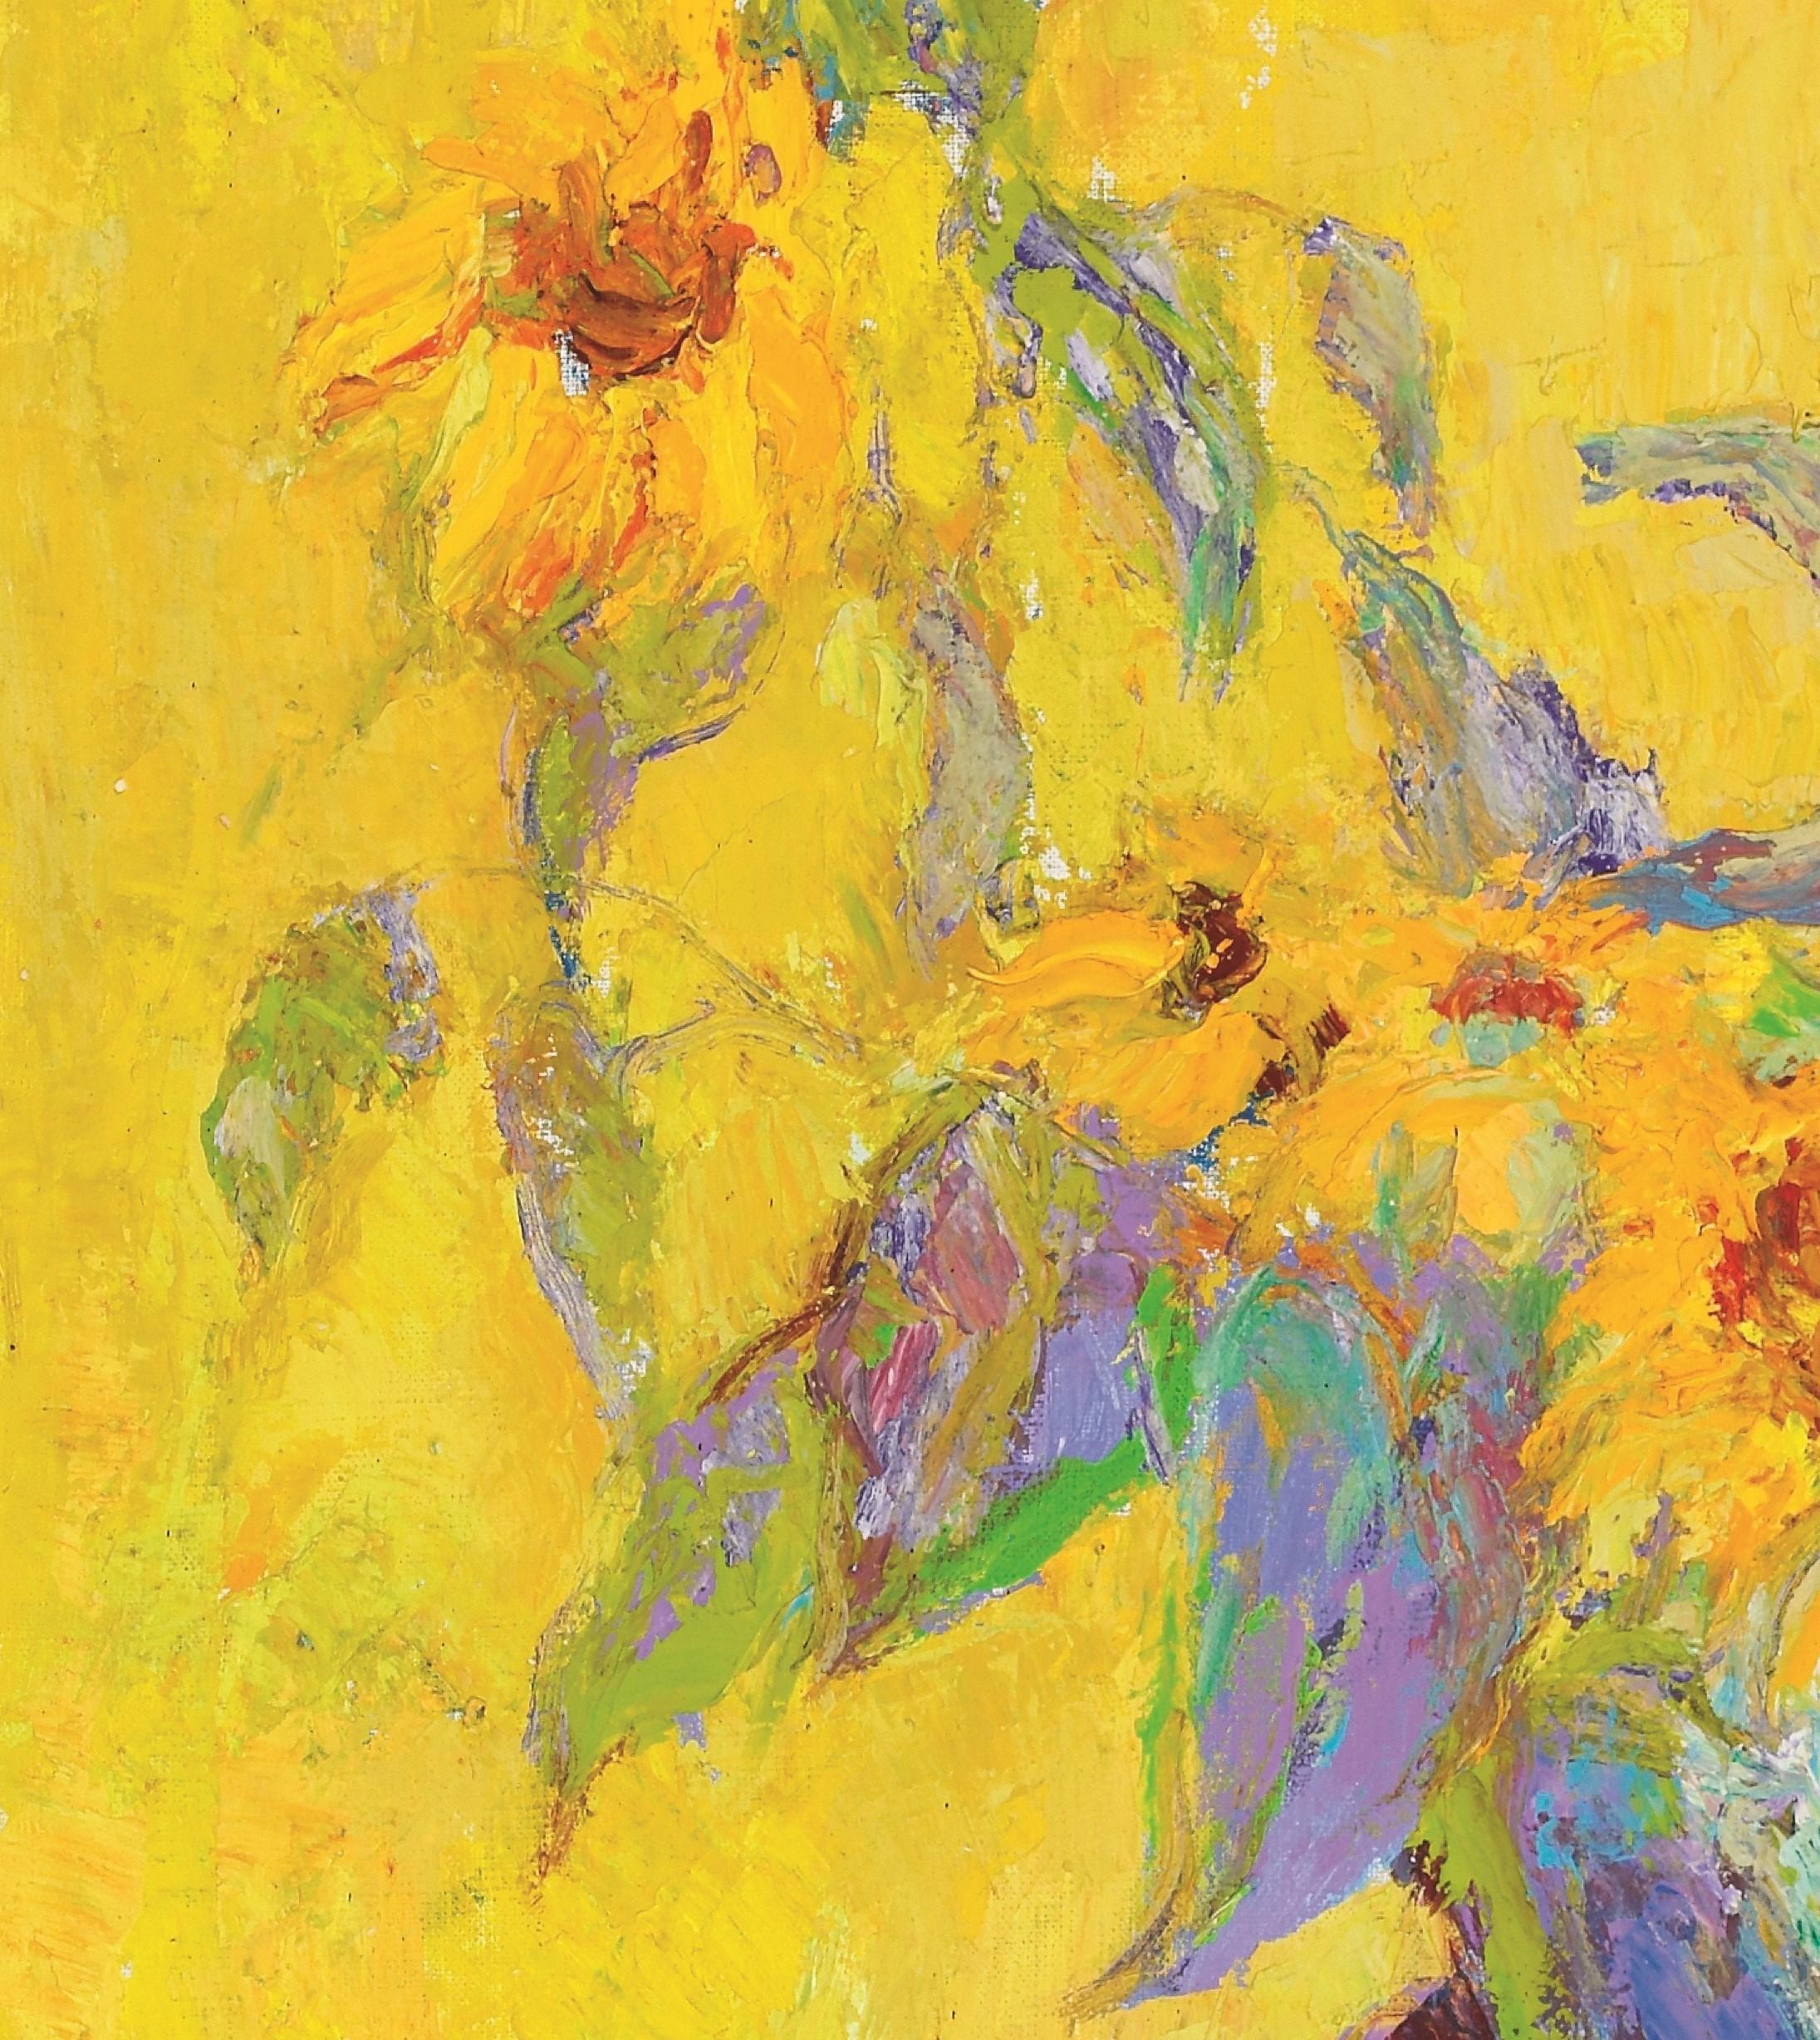 SUNFLOWERS IN A GLASS - Abstract Impressionist Print by Boris Chetkov